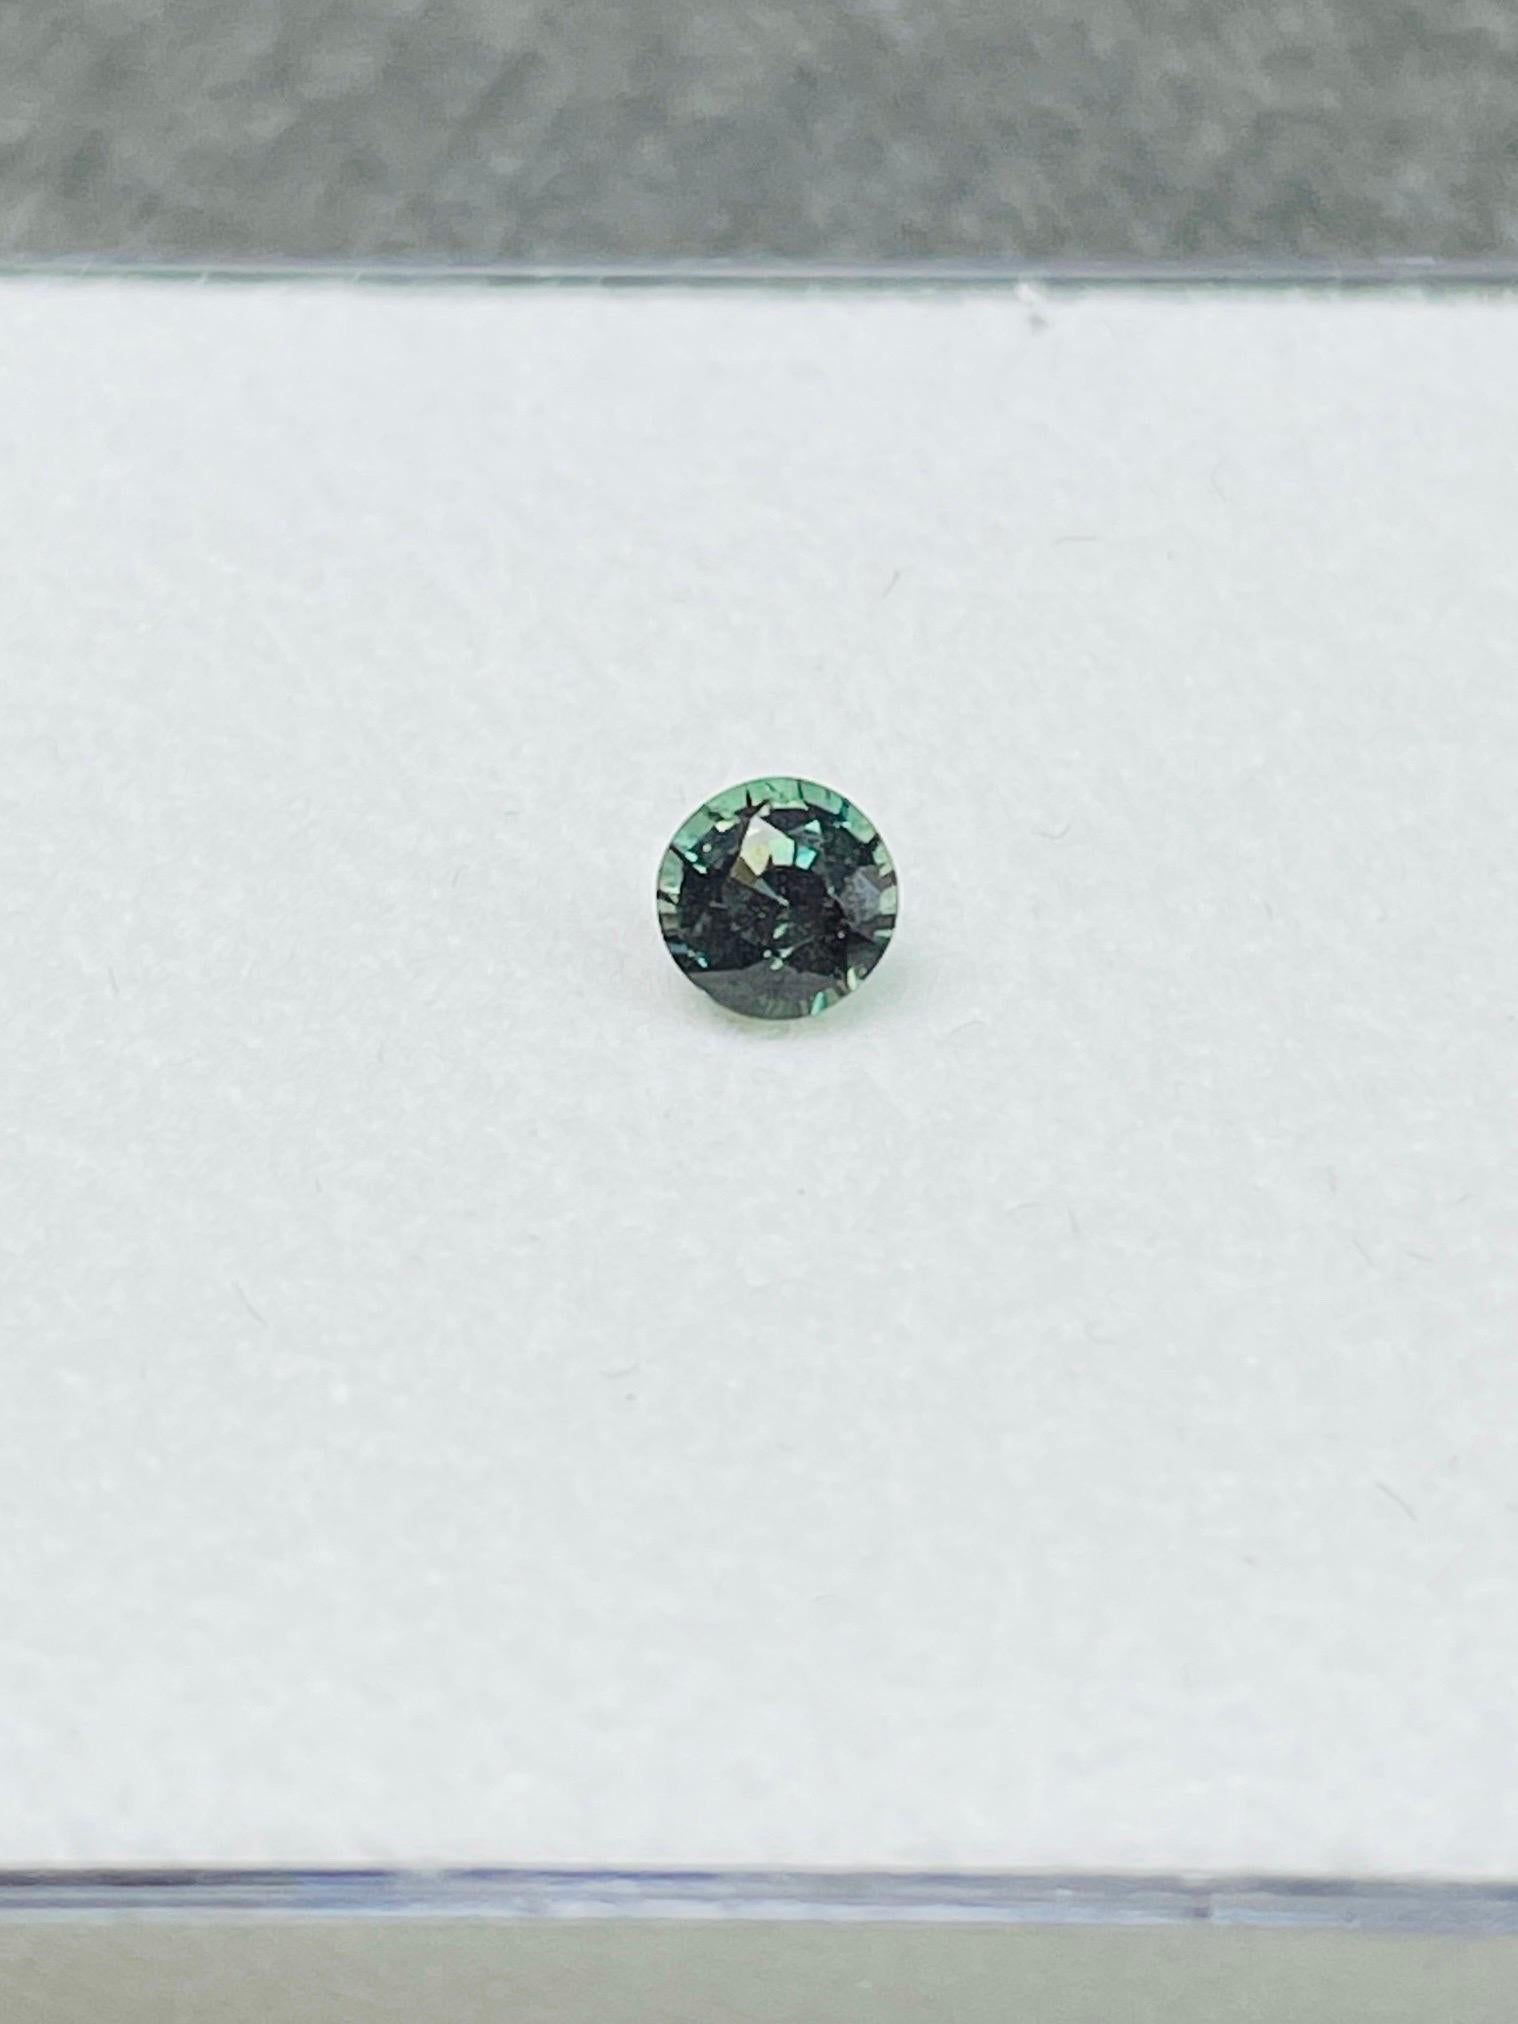 Natural Alexandrine 0.23ct deep green to pinkish color change rare gemstone  For Sale 2